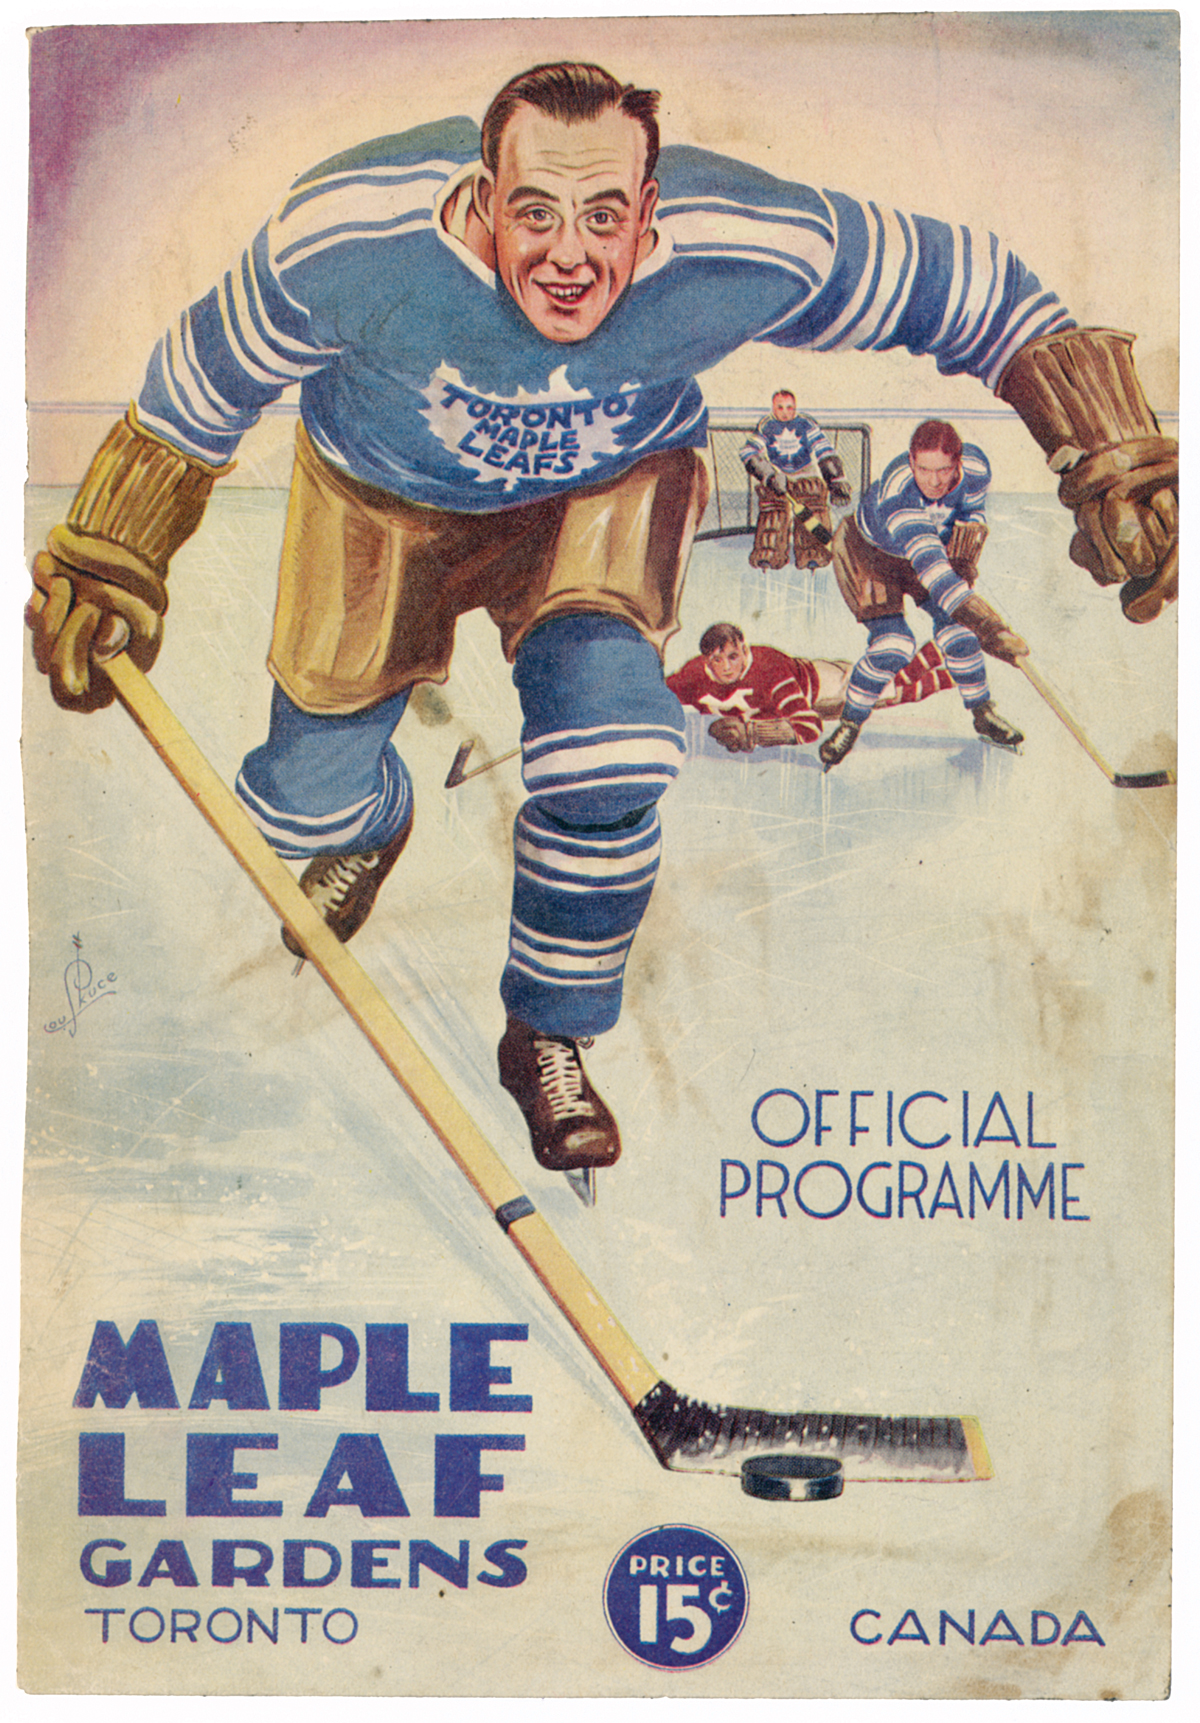 Picture of 1932 Maple Leaf Gardens program cover